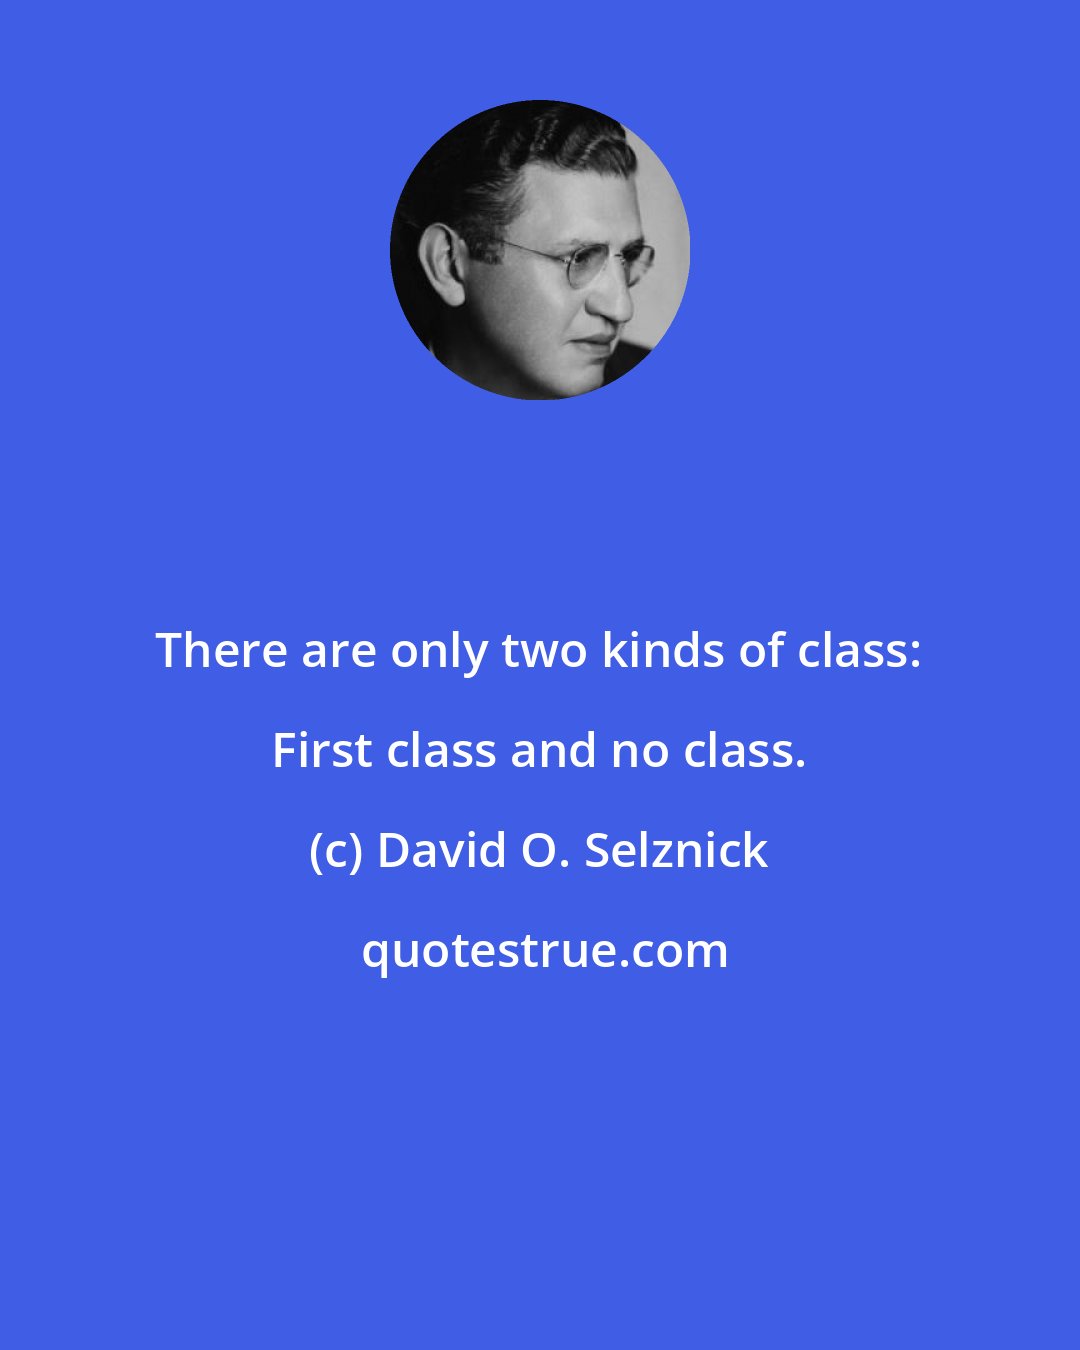 David O. Selznick: There are only two kinds of class: First class and no class.